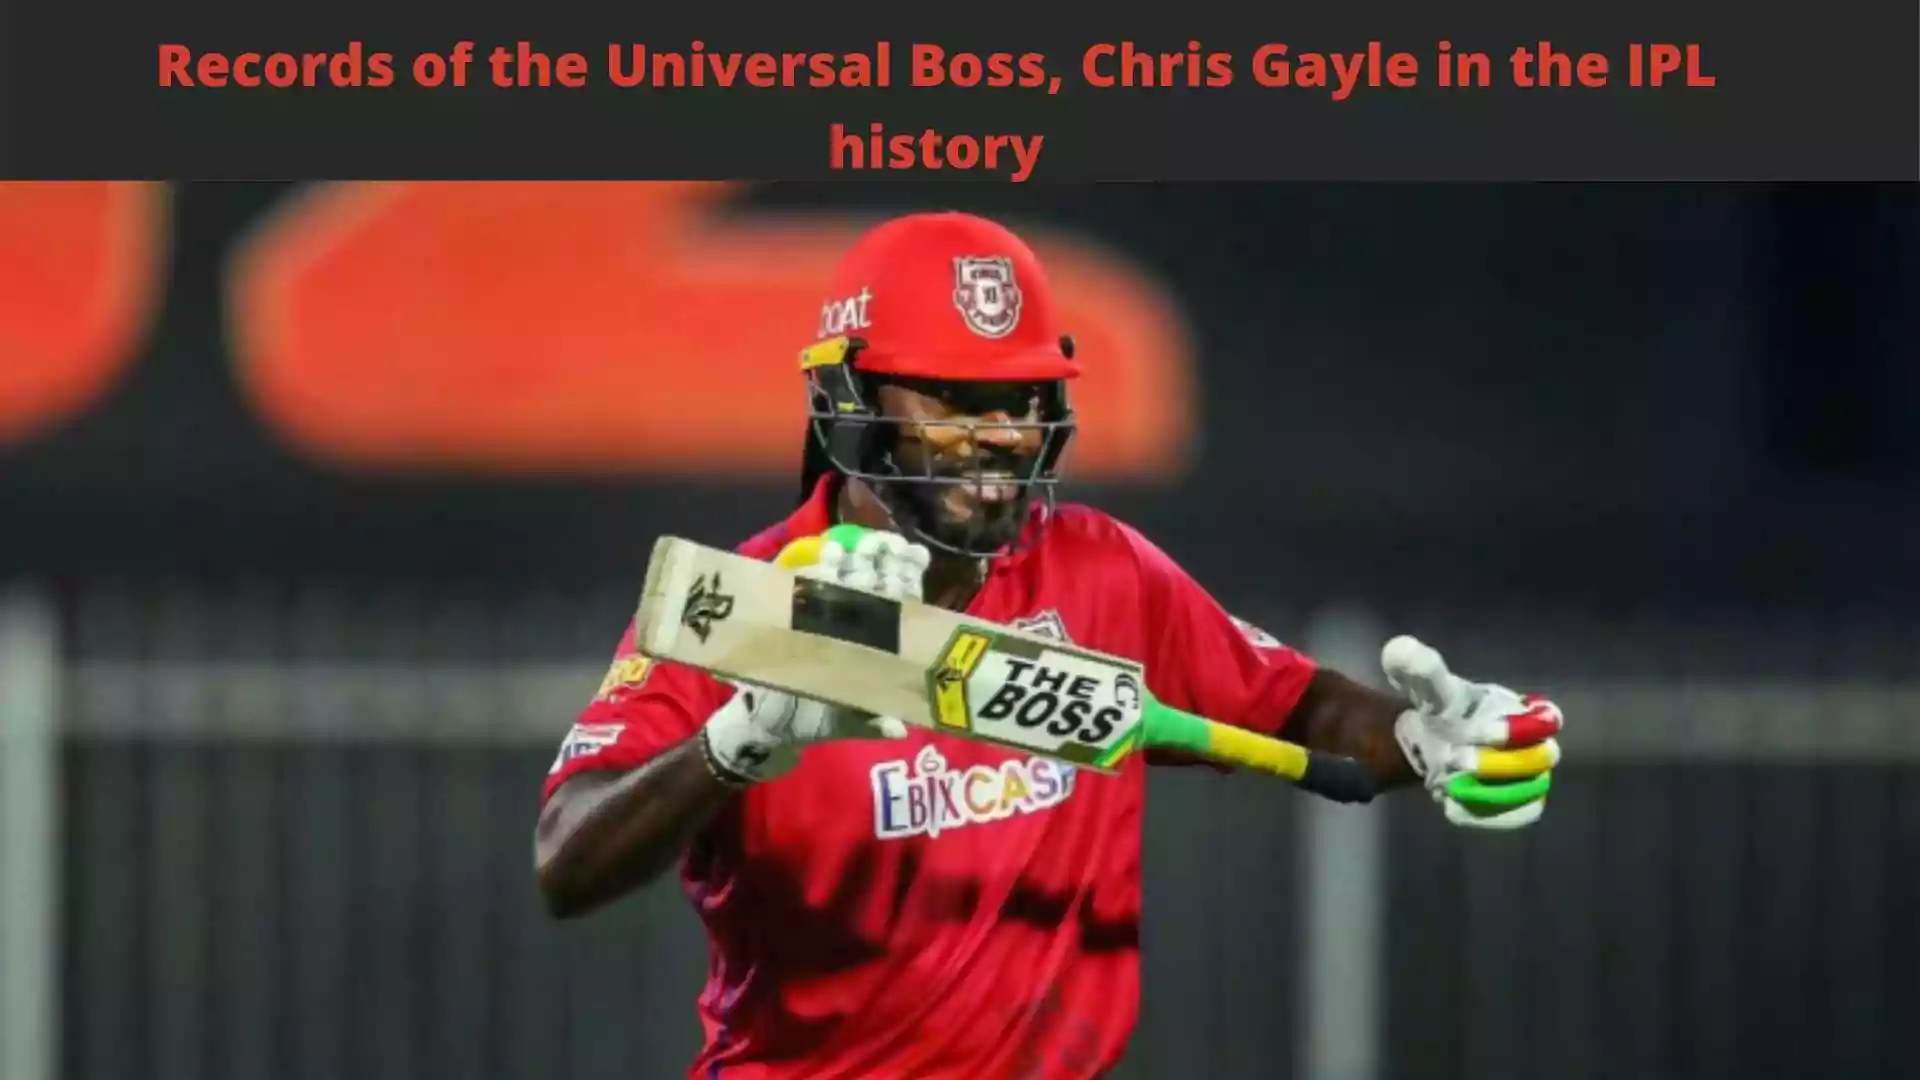 Records of the Universal Boss, Chris Gayle in the IPL history